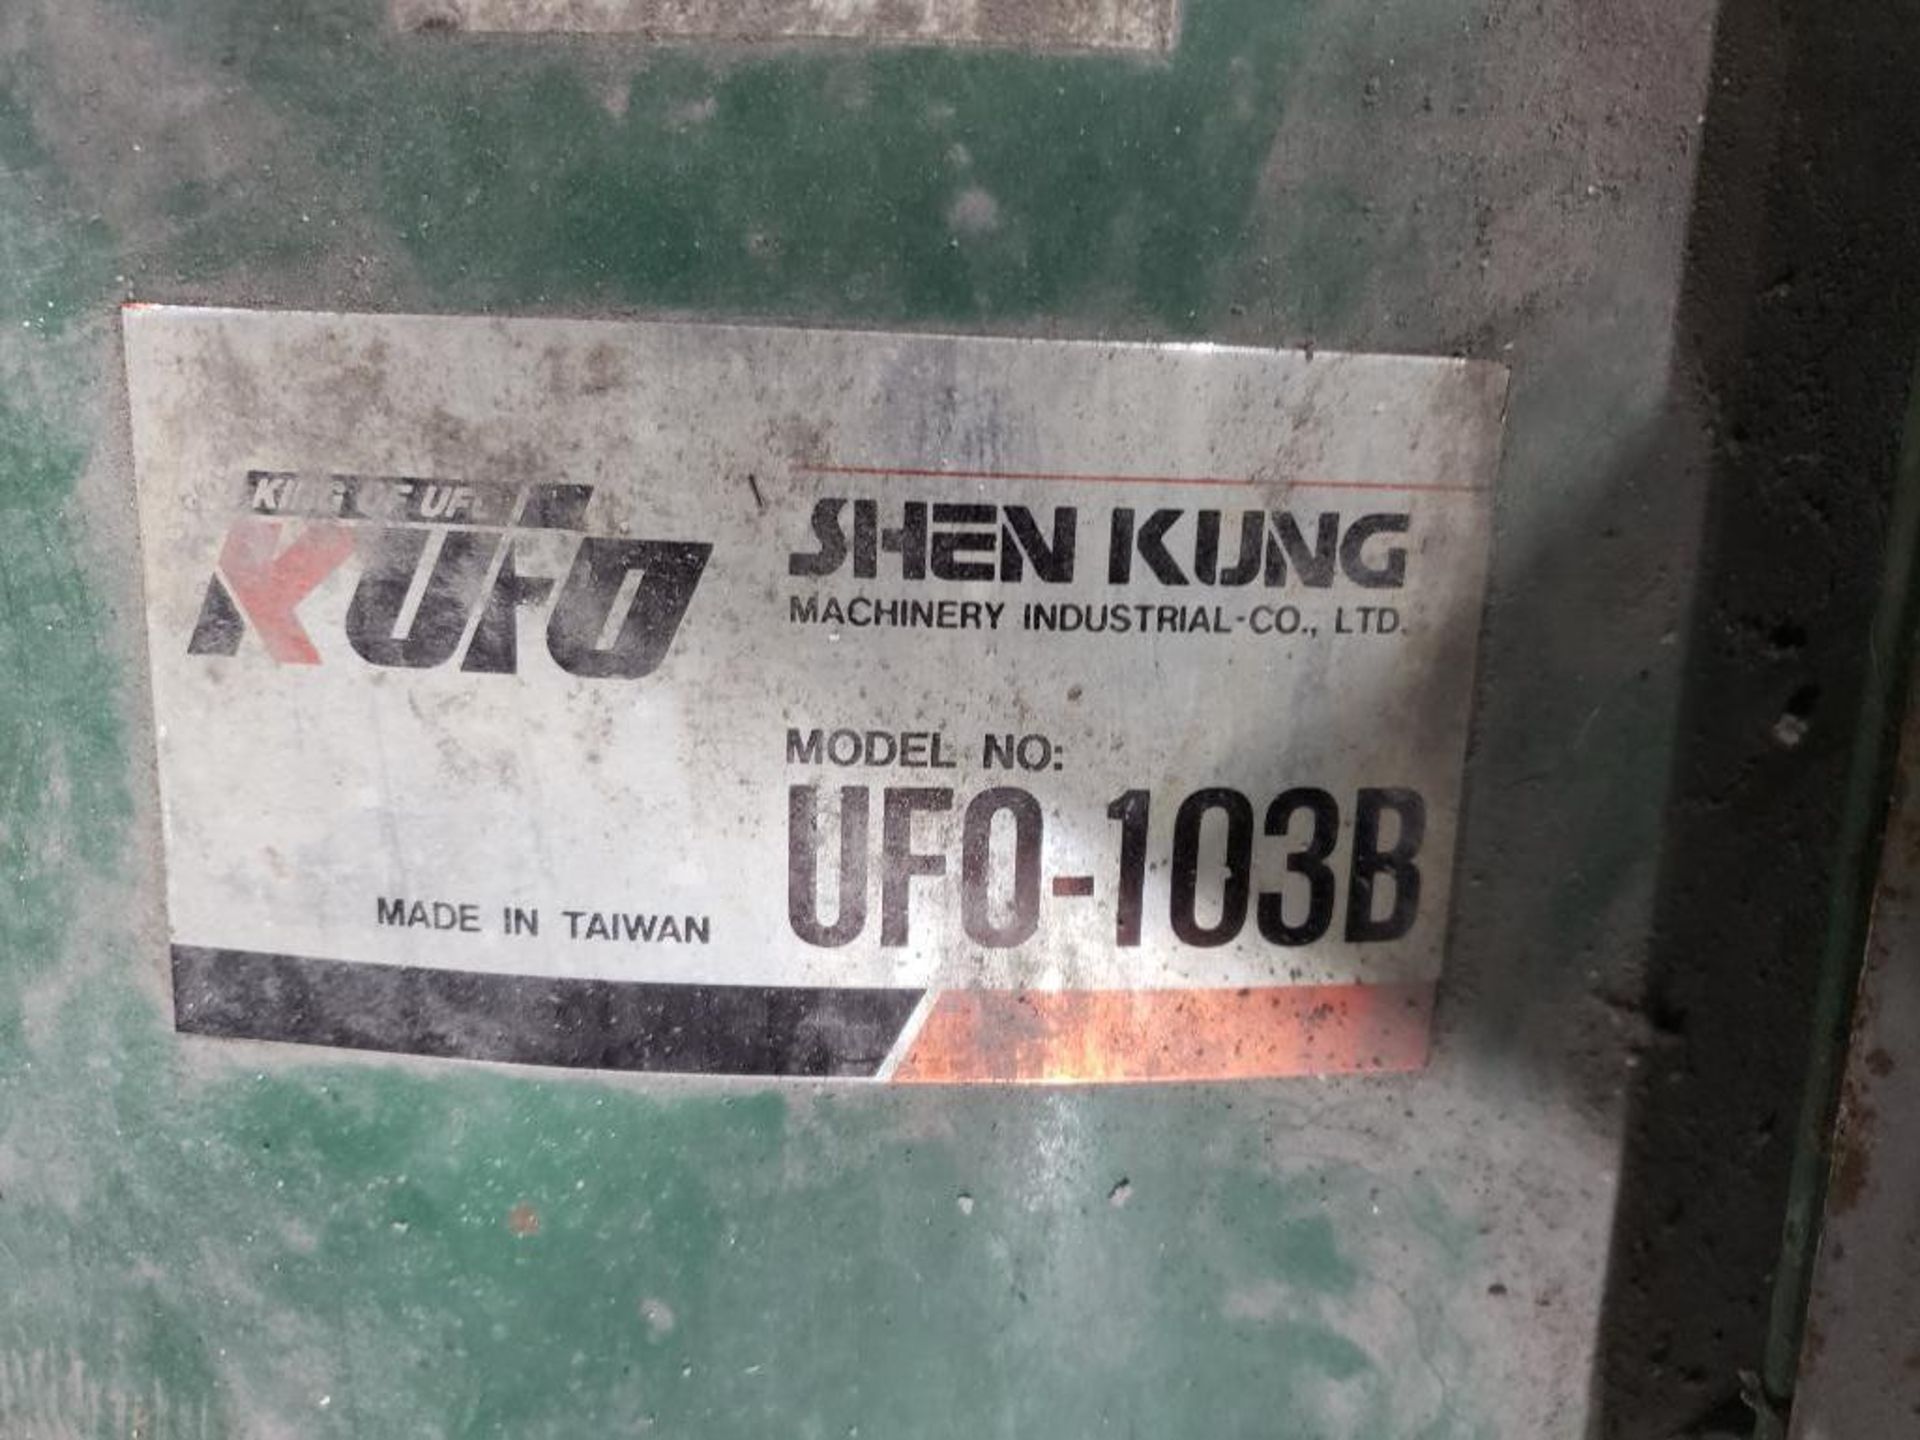 Shen Kung dust collector. Model UFO-103B. 3 phase 220/440v. - Image 2 of 10